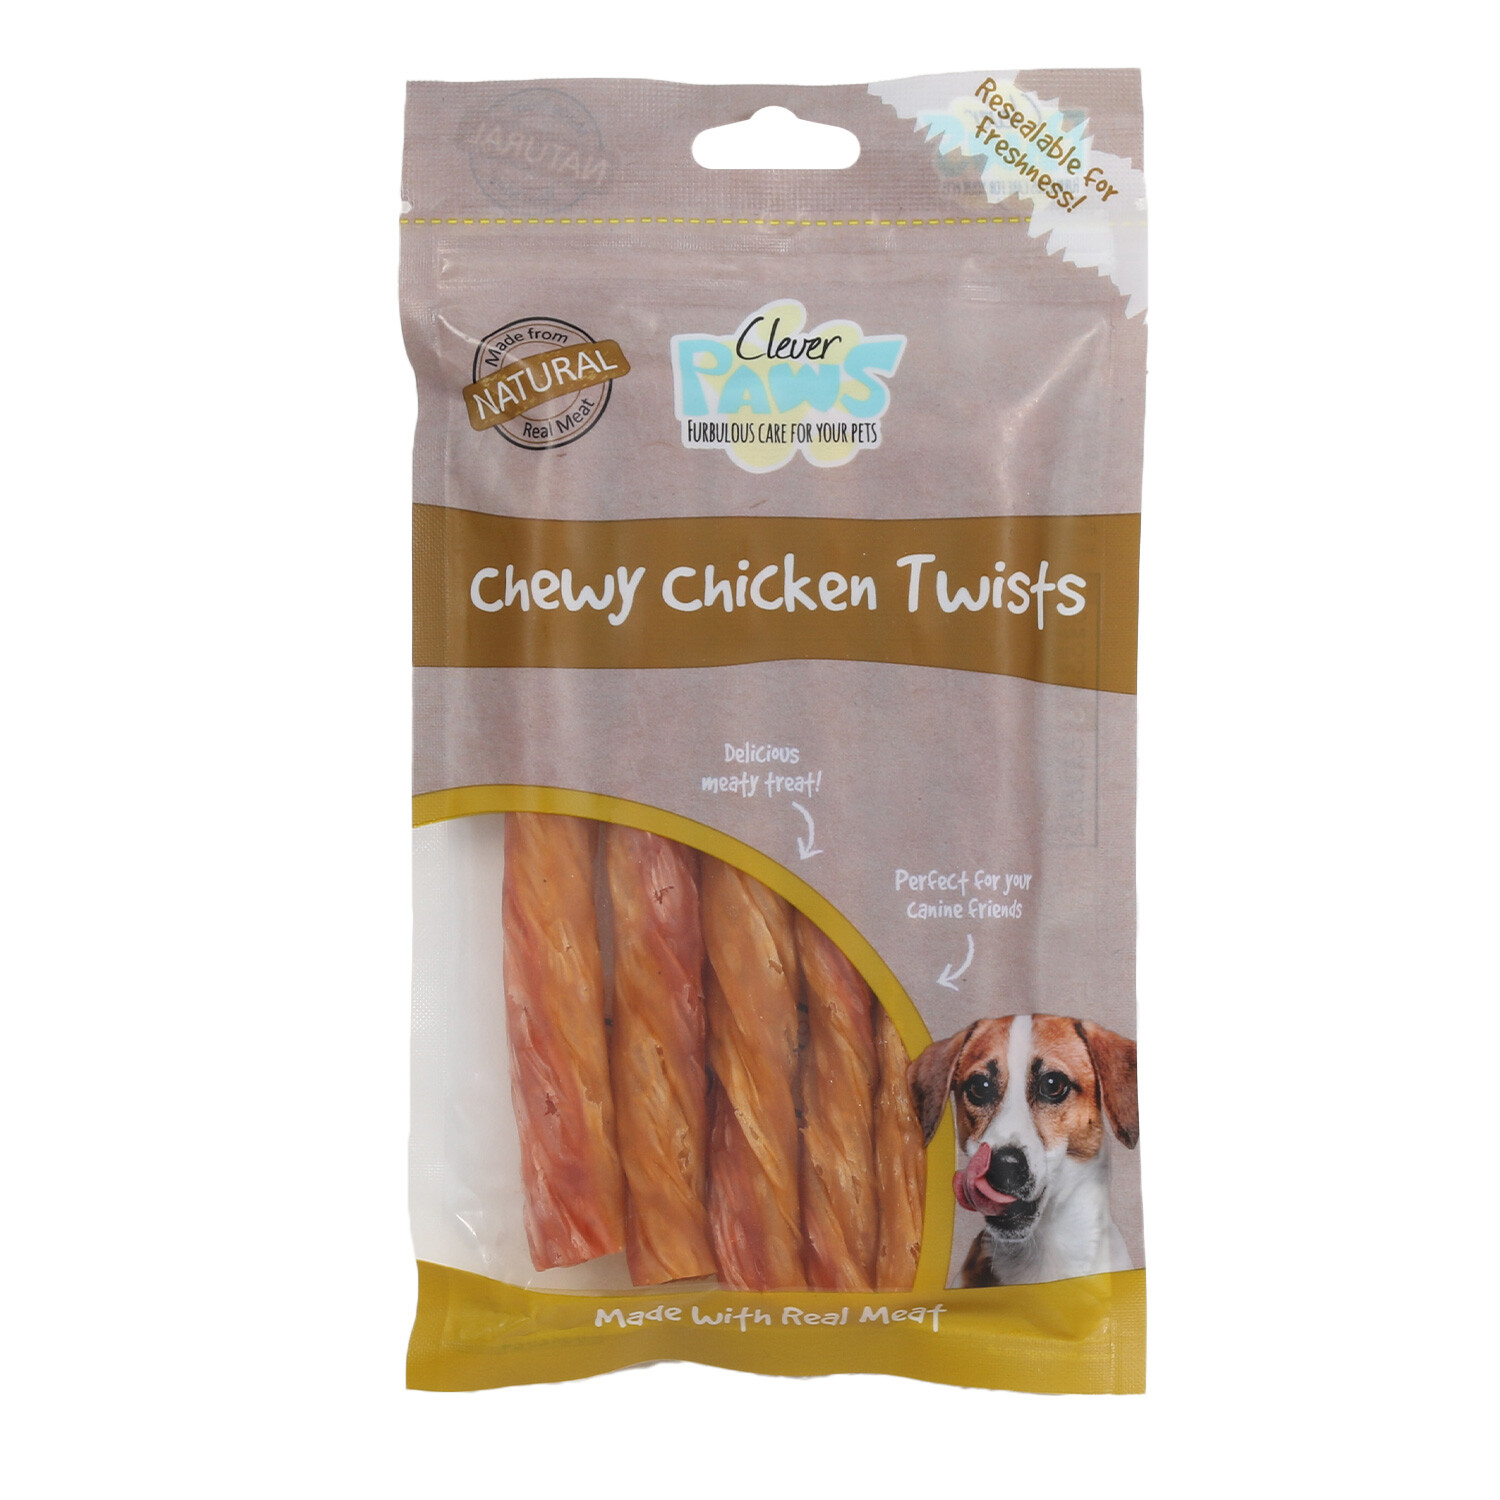 Clever Paws Chewy Chicken Twists Dog Treat Image 1